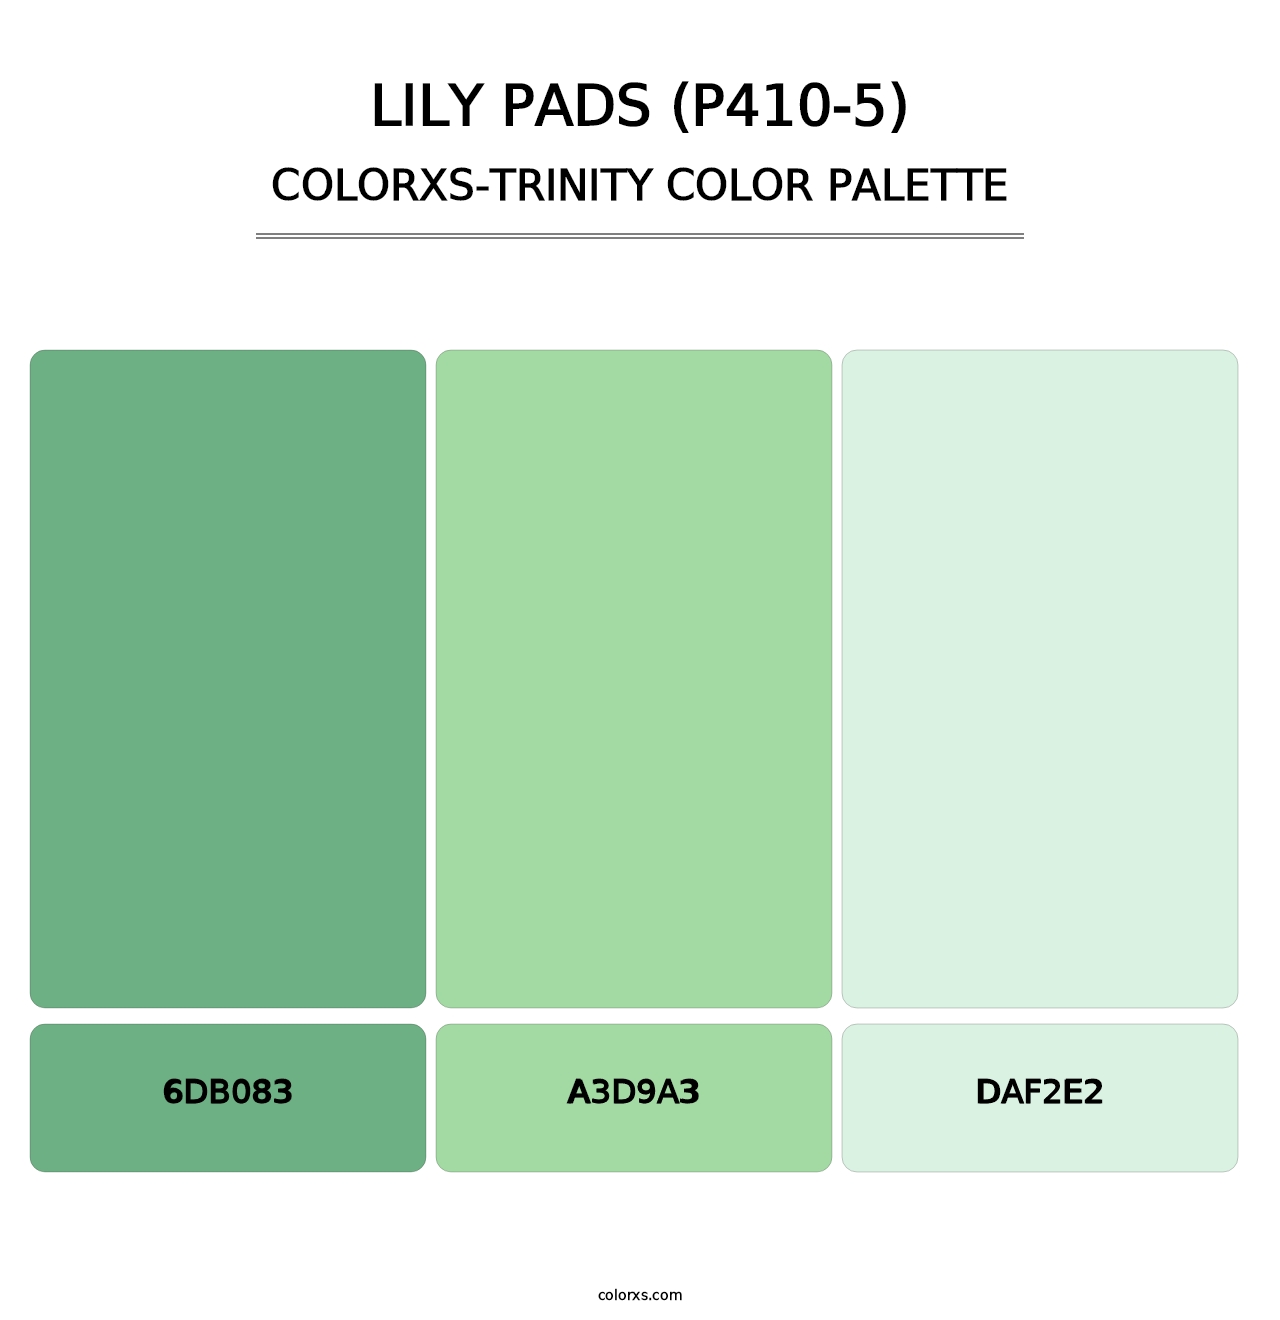 Lily Pads (P410-5) - Colorxs Trinity Palette